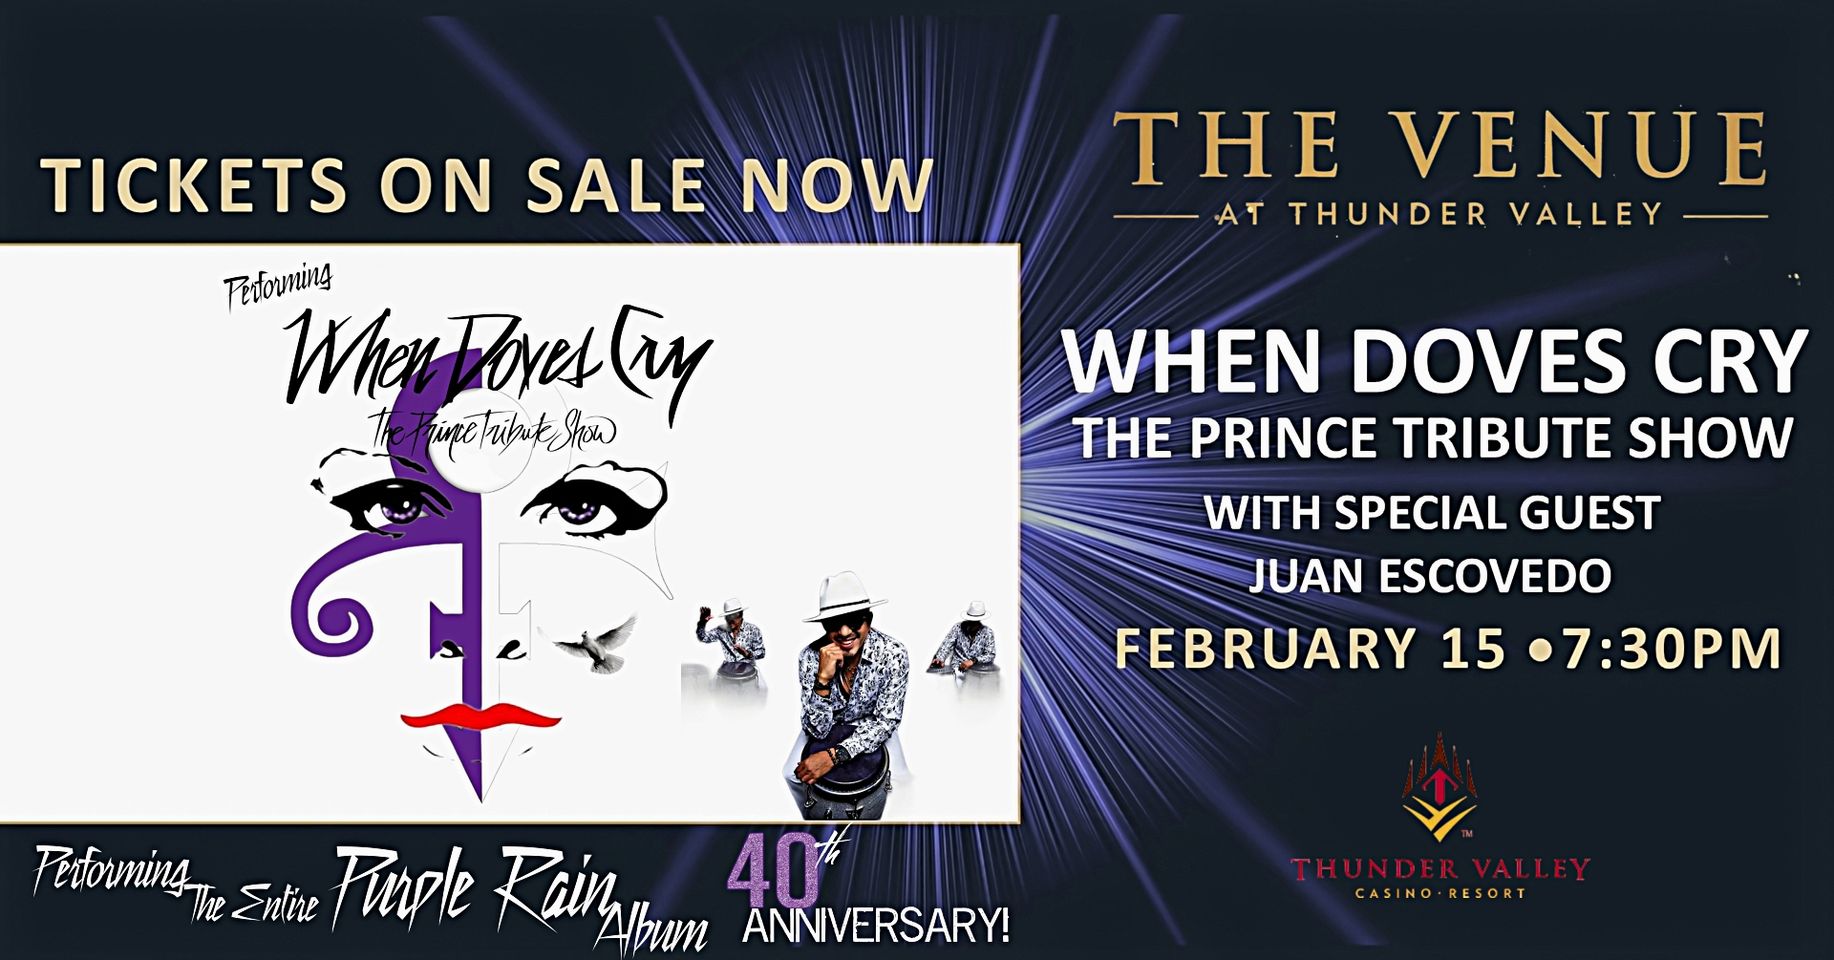 Celebrating the 40th Anniversary of the Purple Rain Album with When Doves Cry Live at The Venue